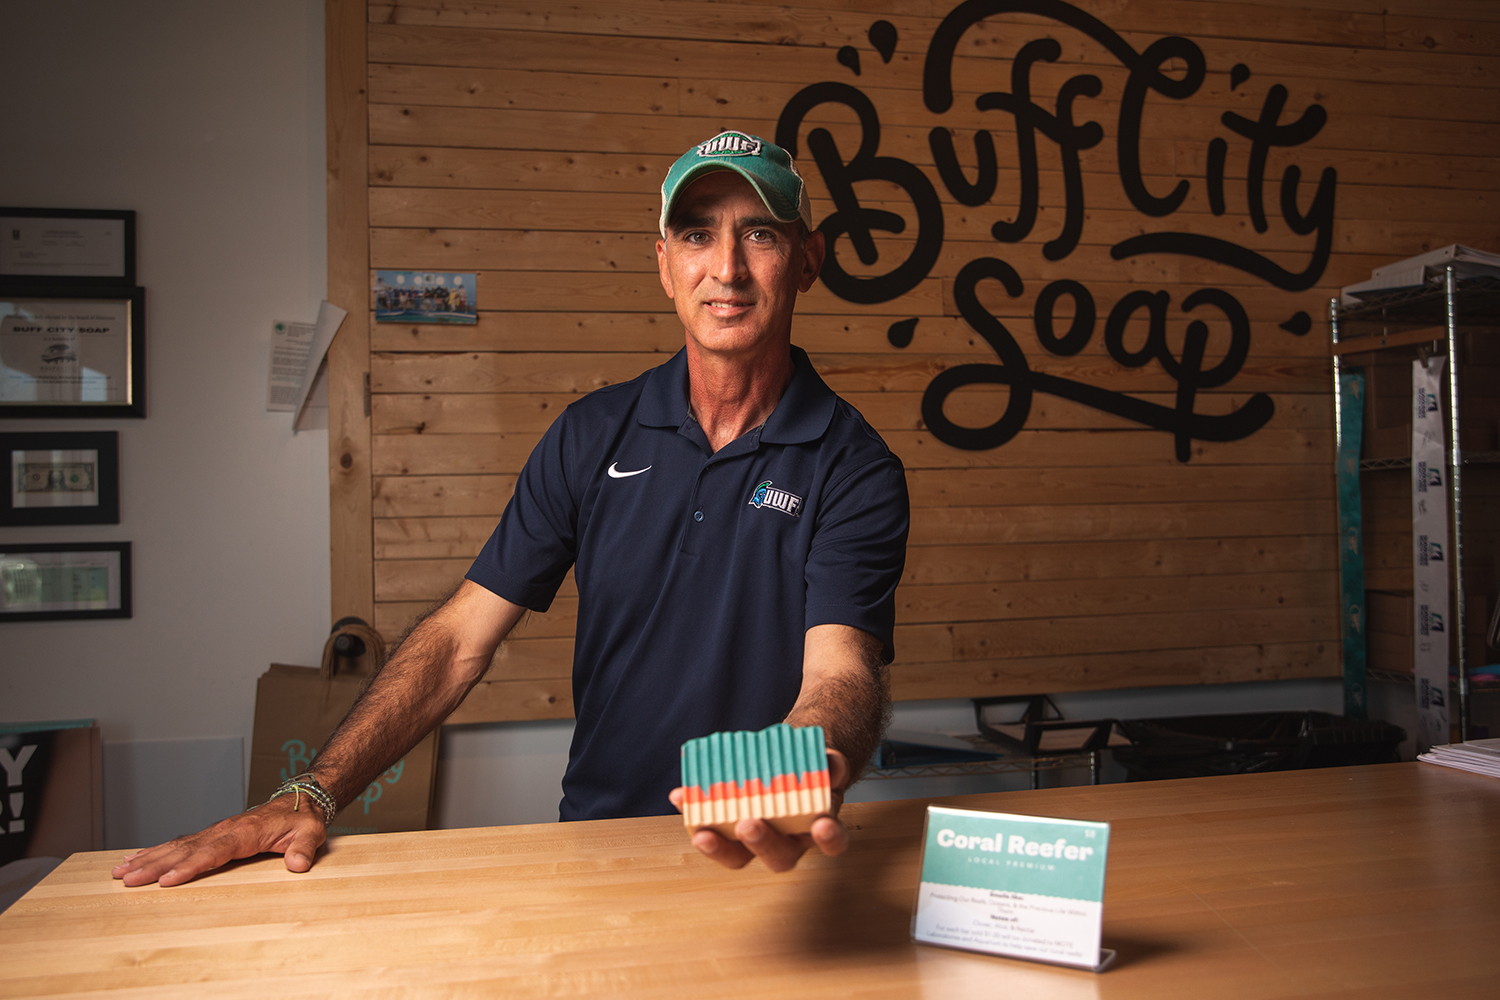 Cliff Richardson, a Spring 2021 marine biology graduate, came up with the innovative idea to create a relationship between Buff City Soap and MOTE Marine Laboratory and Aquarium for the "Conservation in Practice" assignment in the Biology of Coral Reefs course.